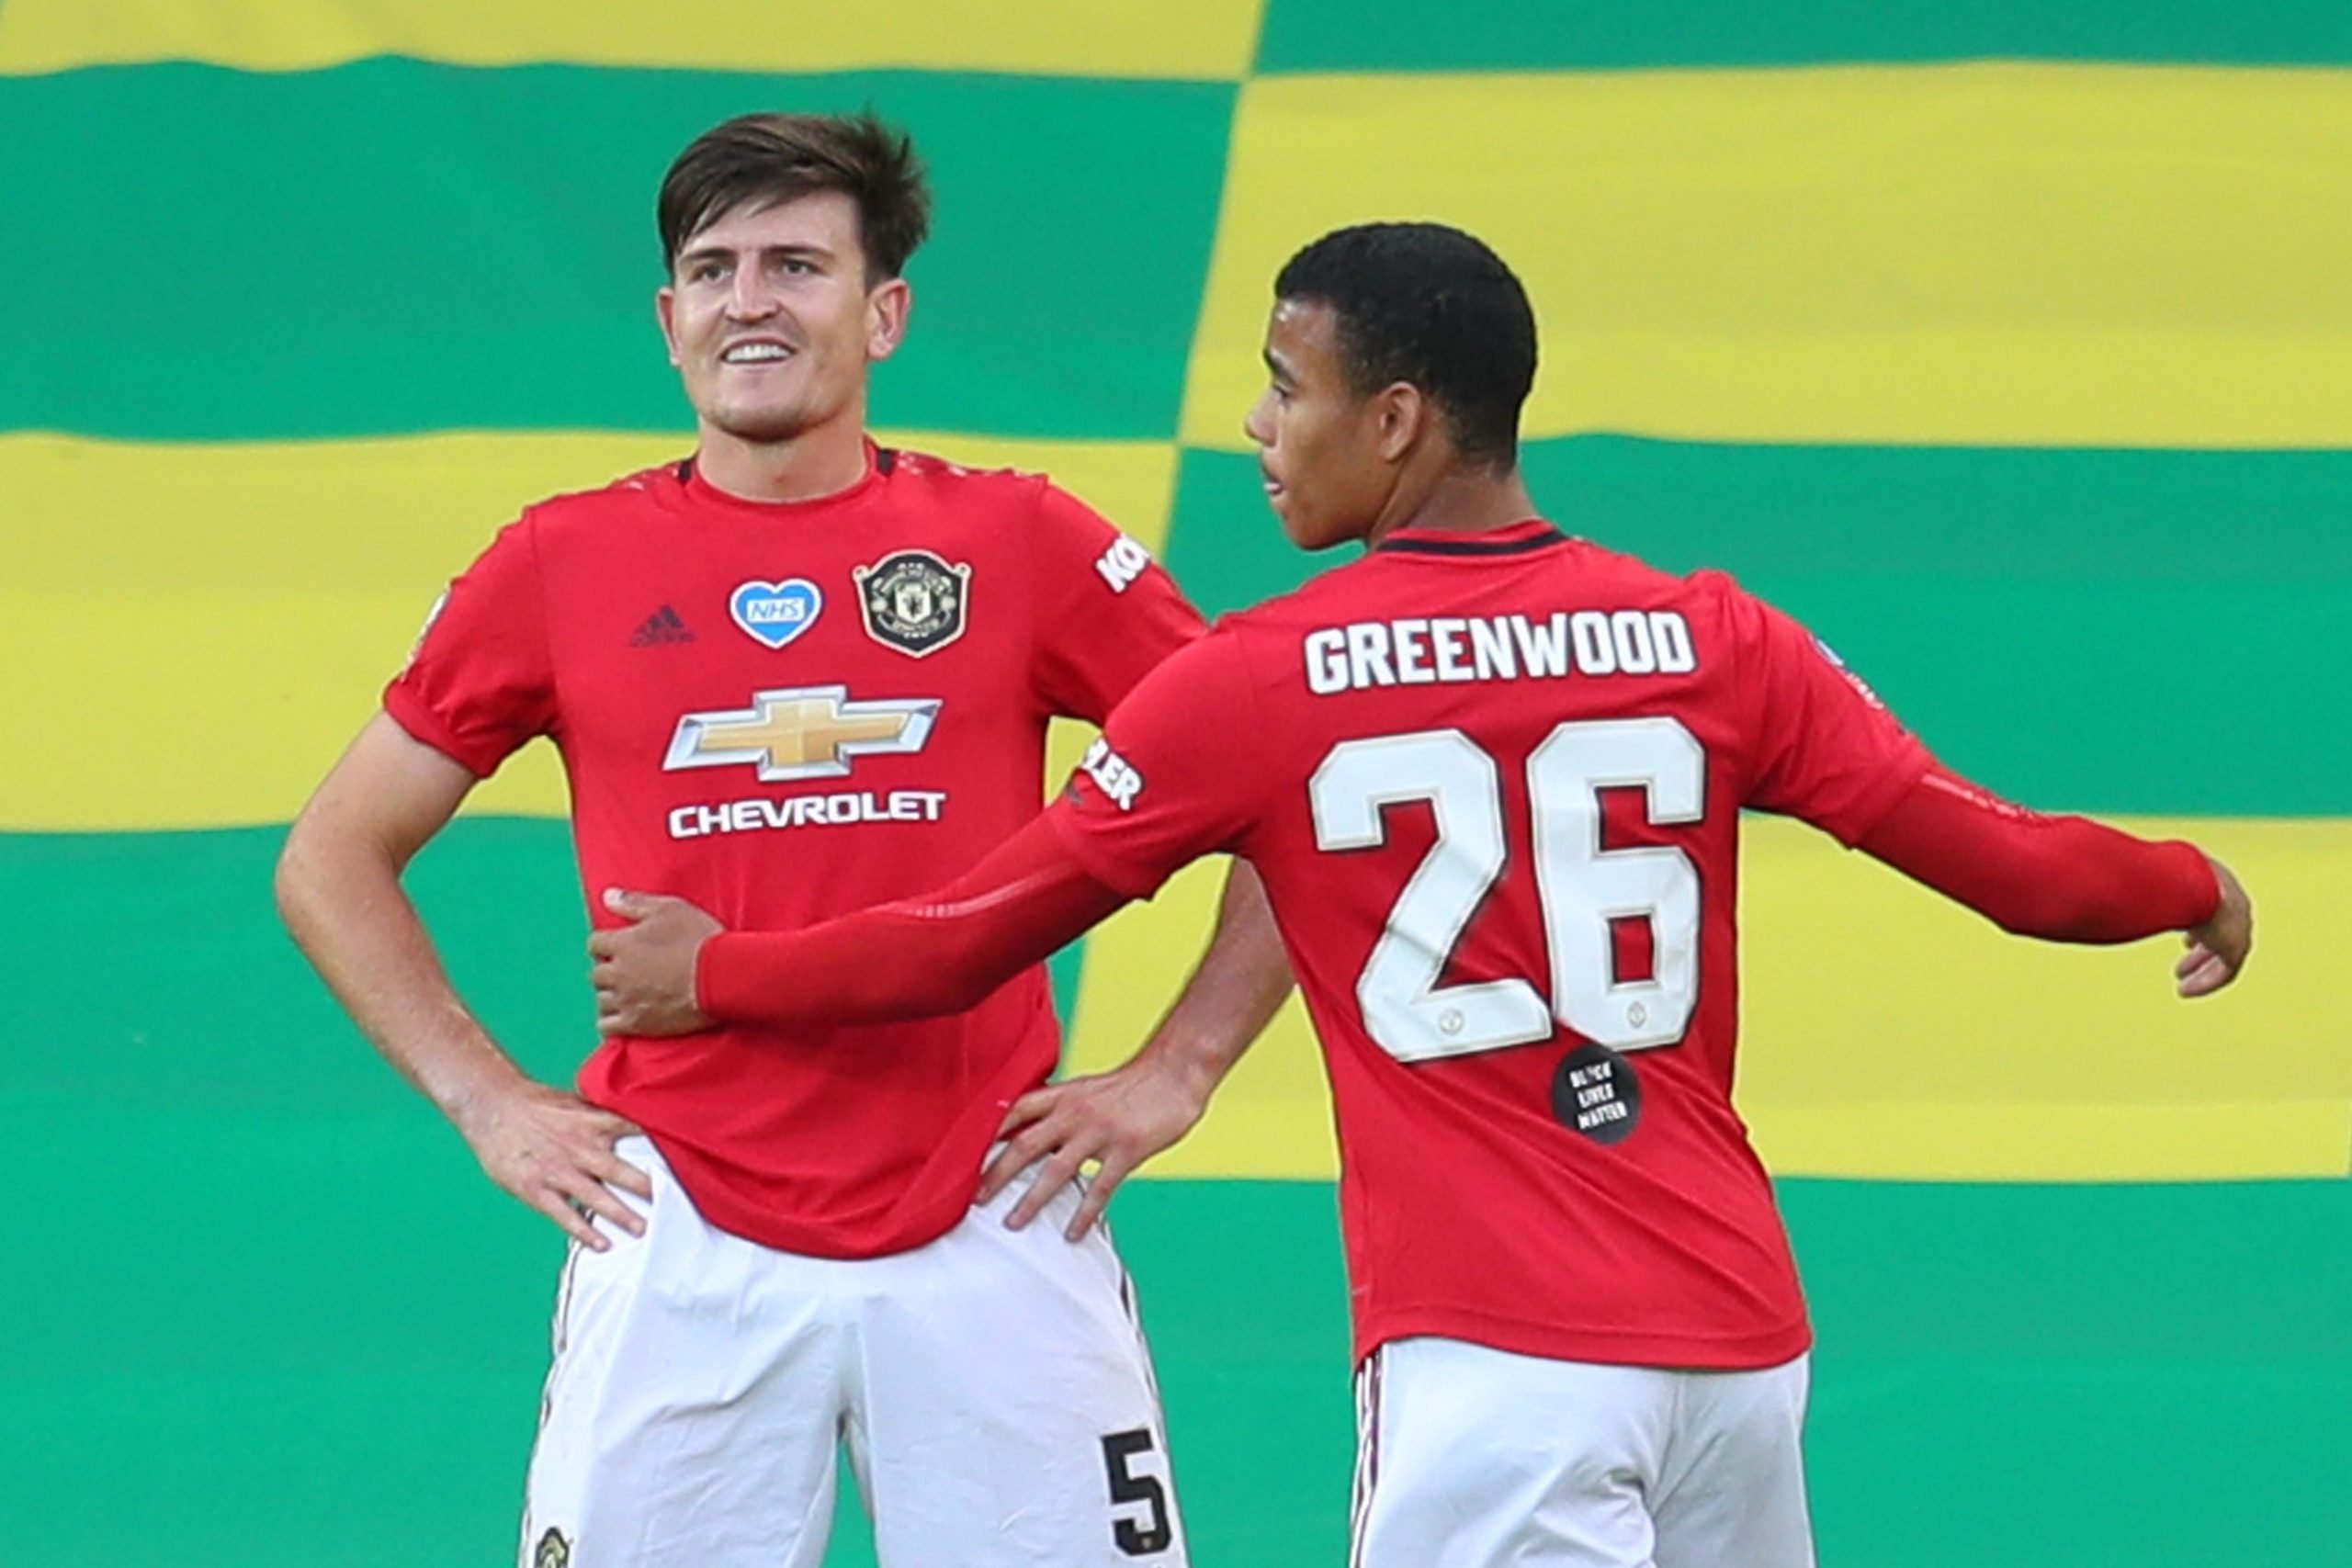 Manchester United's English defender Harry Maguire (L) celebrates scoring their second goal during the English FA Cup quarter-final football match between Norwich City and Manchester United at Carrow Road in Norwich, eastern England on June 27, 2020. (Photo by Catherine Ivill / POOL / AFP)